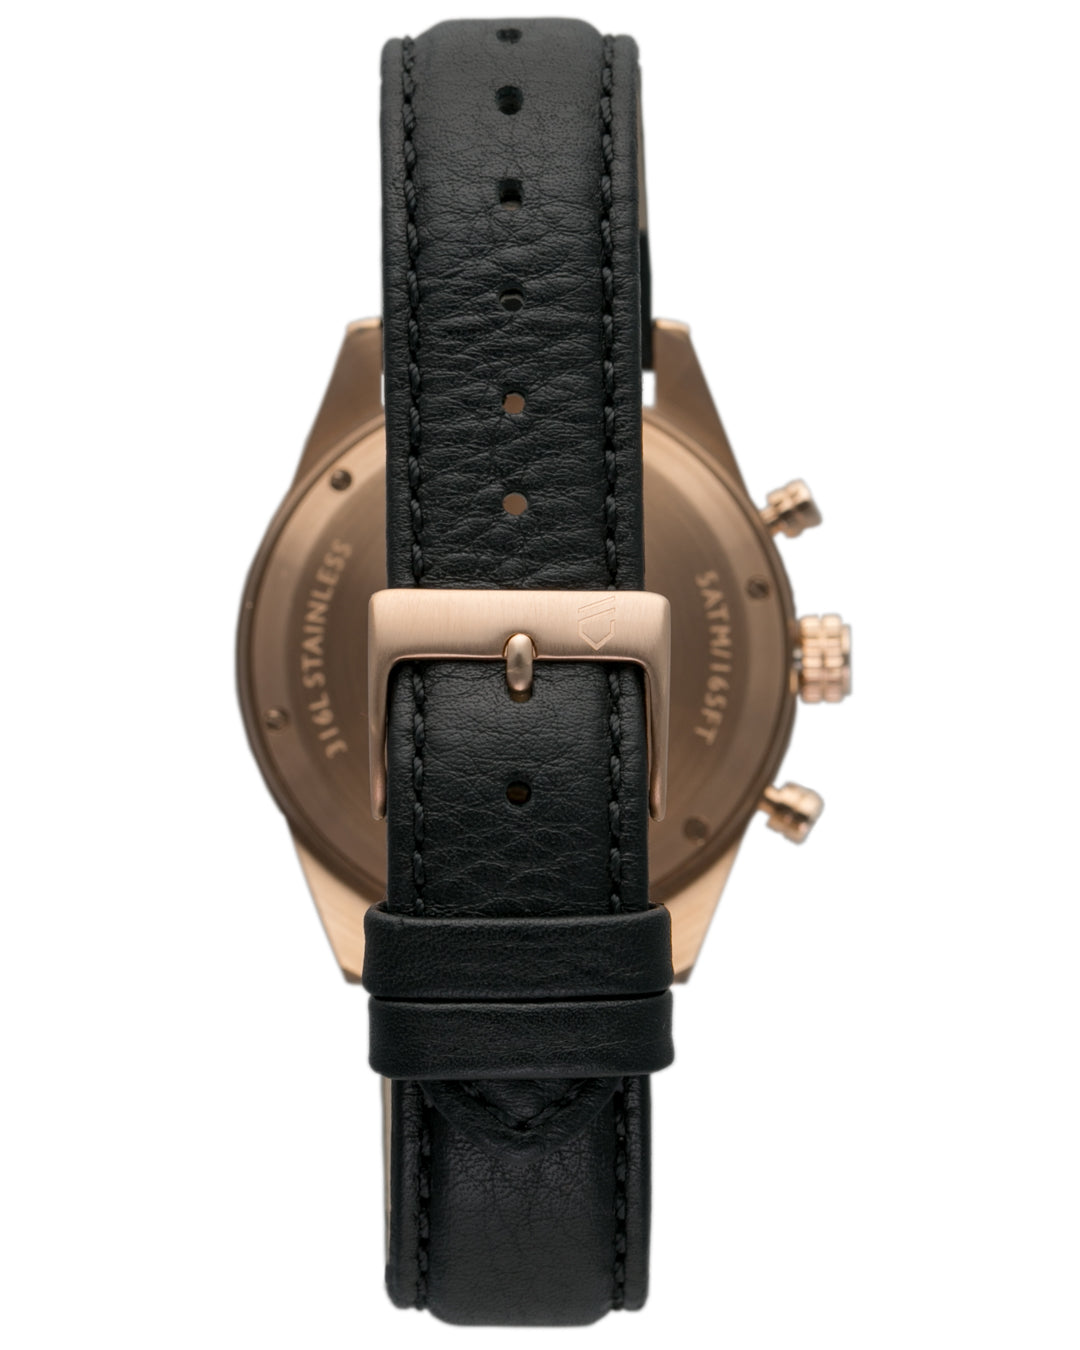 Rose gold and black chronograph watch with three hands and interchangeable leather straps